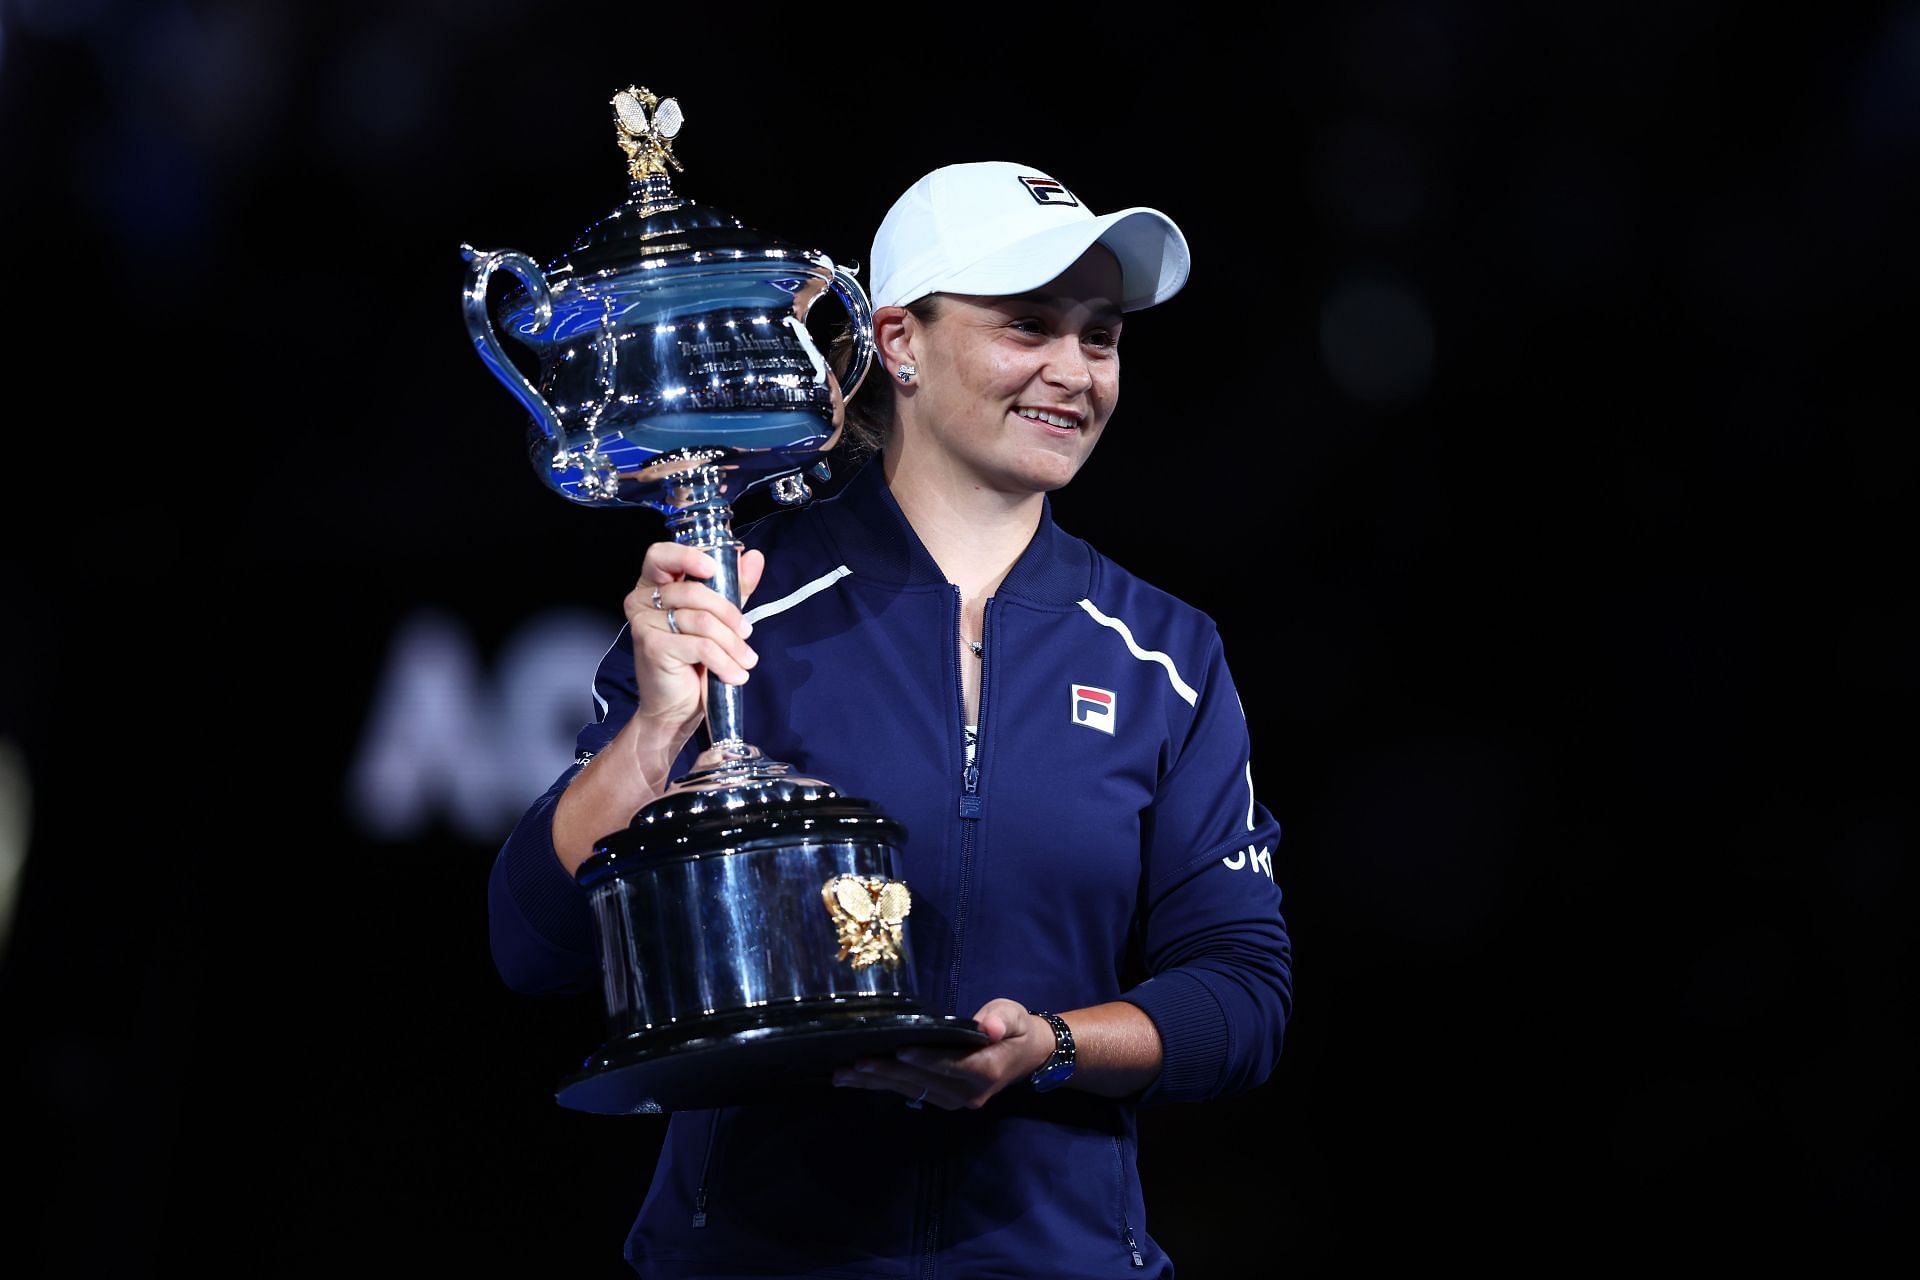 Ashleigh Barty was simply unstoppable at the 2022 Australian Open